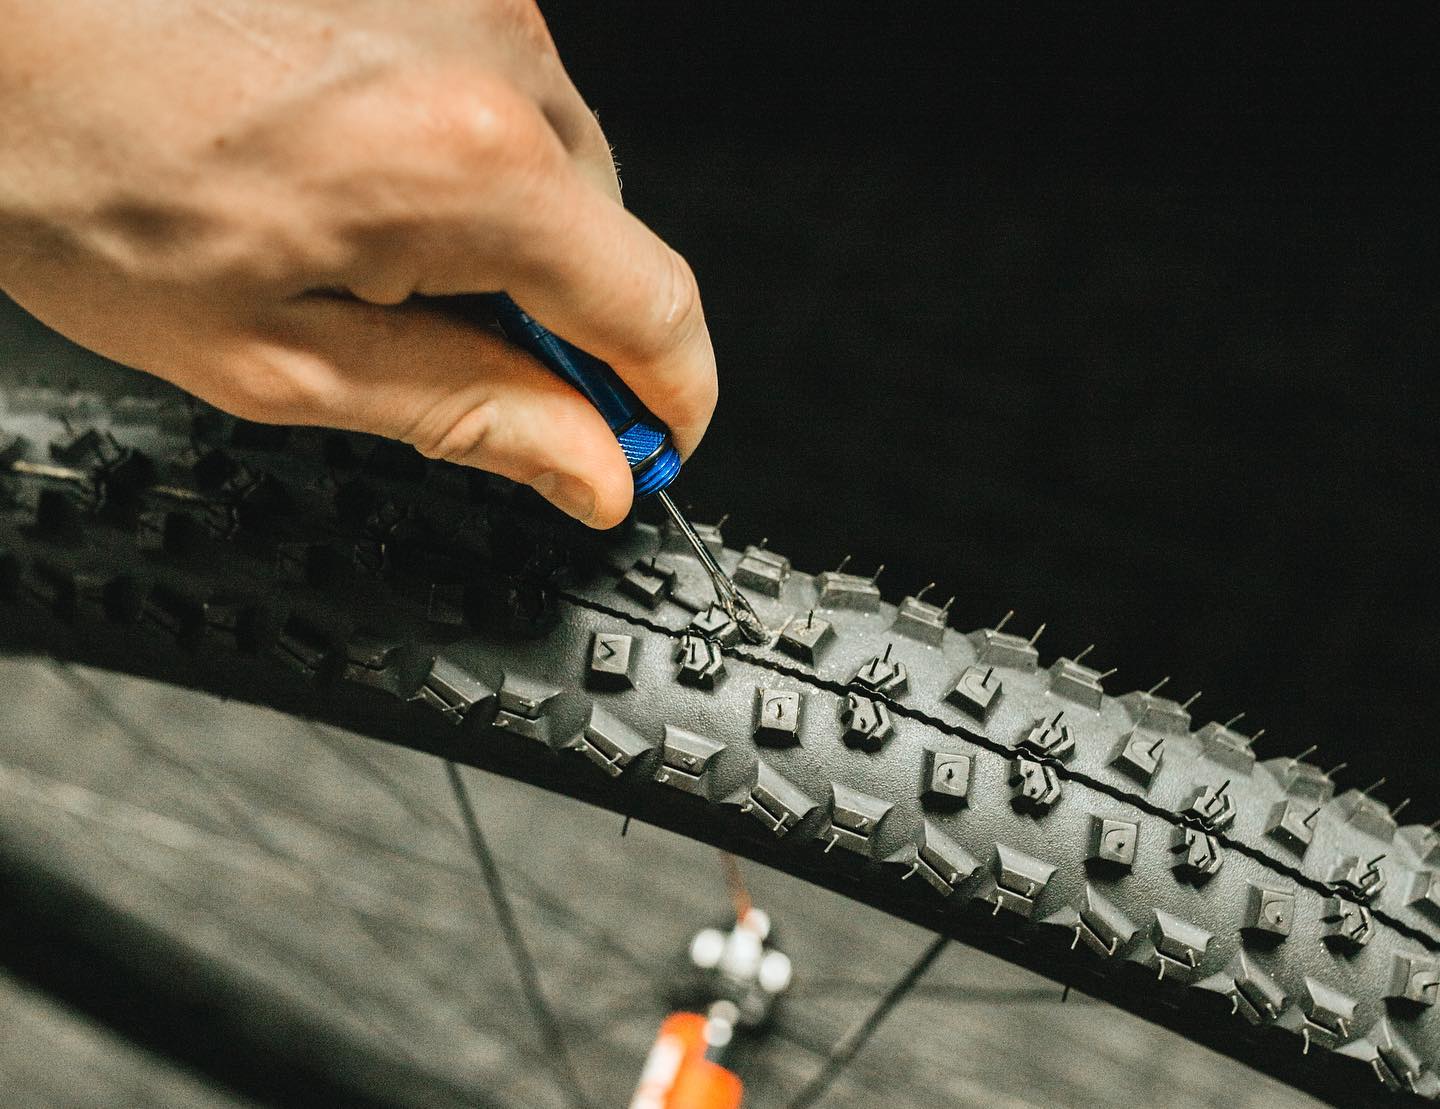 KOM Cycling attacks the flats with light weight Tubeless Tire Repair Tool